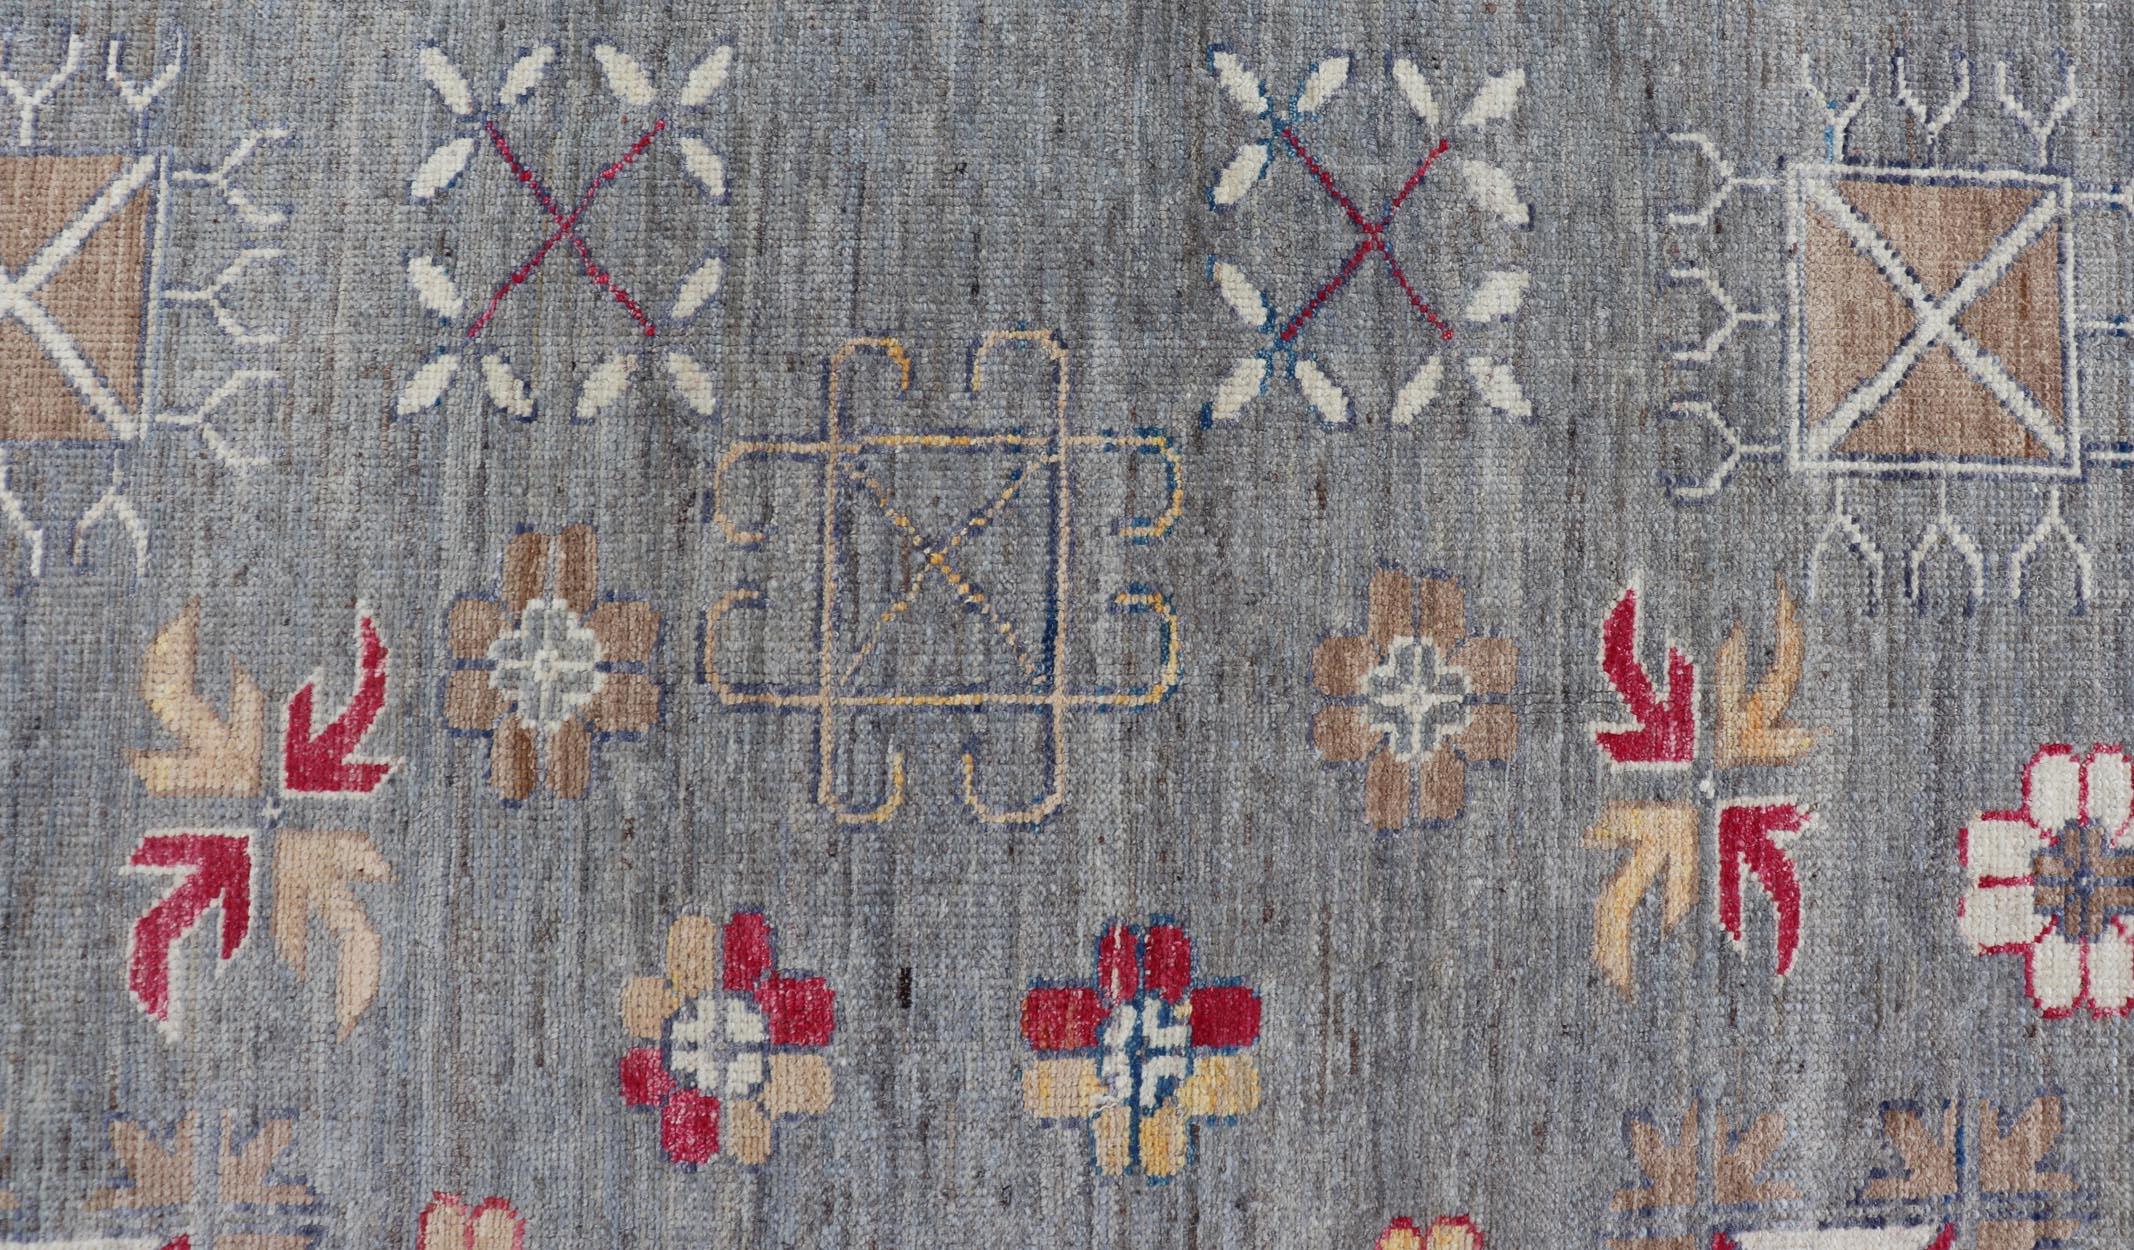 Modern Khotan Rug with Circular Medallions in Shades of Gray, Red, and Brown. Keivan Woven Arts / rug AFG-67300 / country of origin / type: Afghanistan / Khotan. 
Measures: 9'6 x 11'9 
This modern Khotan made rug features Samarkand design with